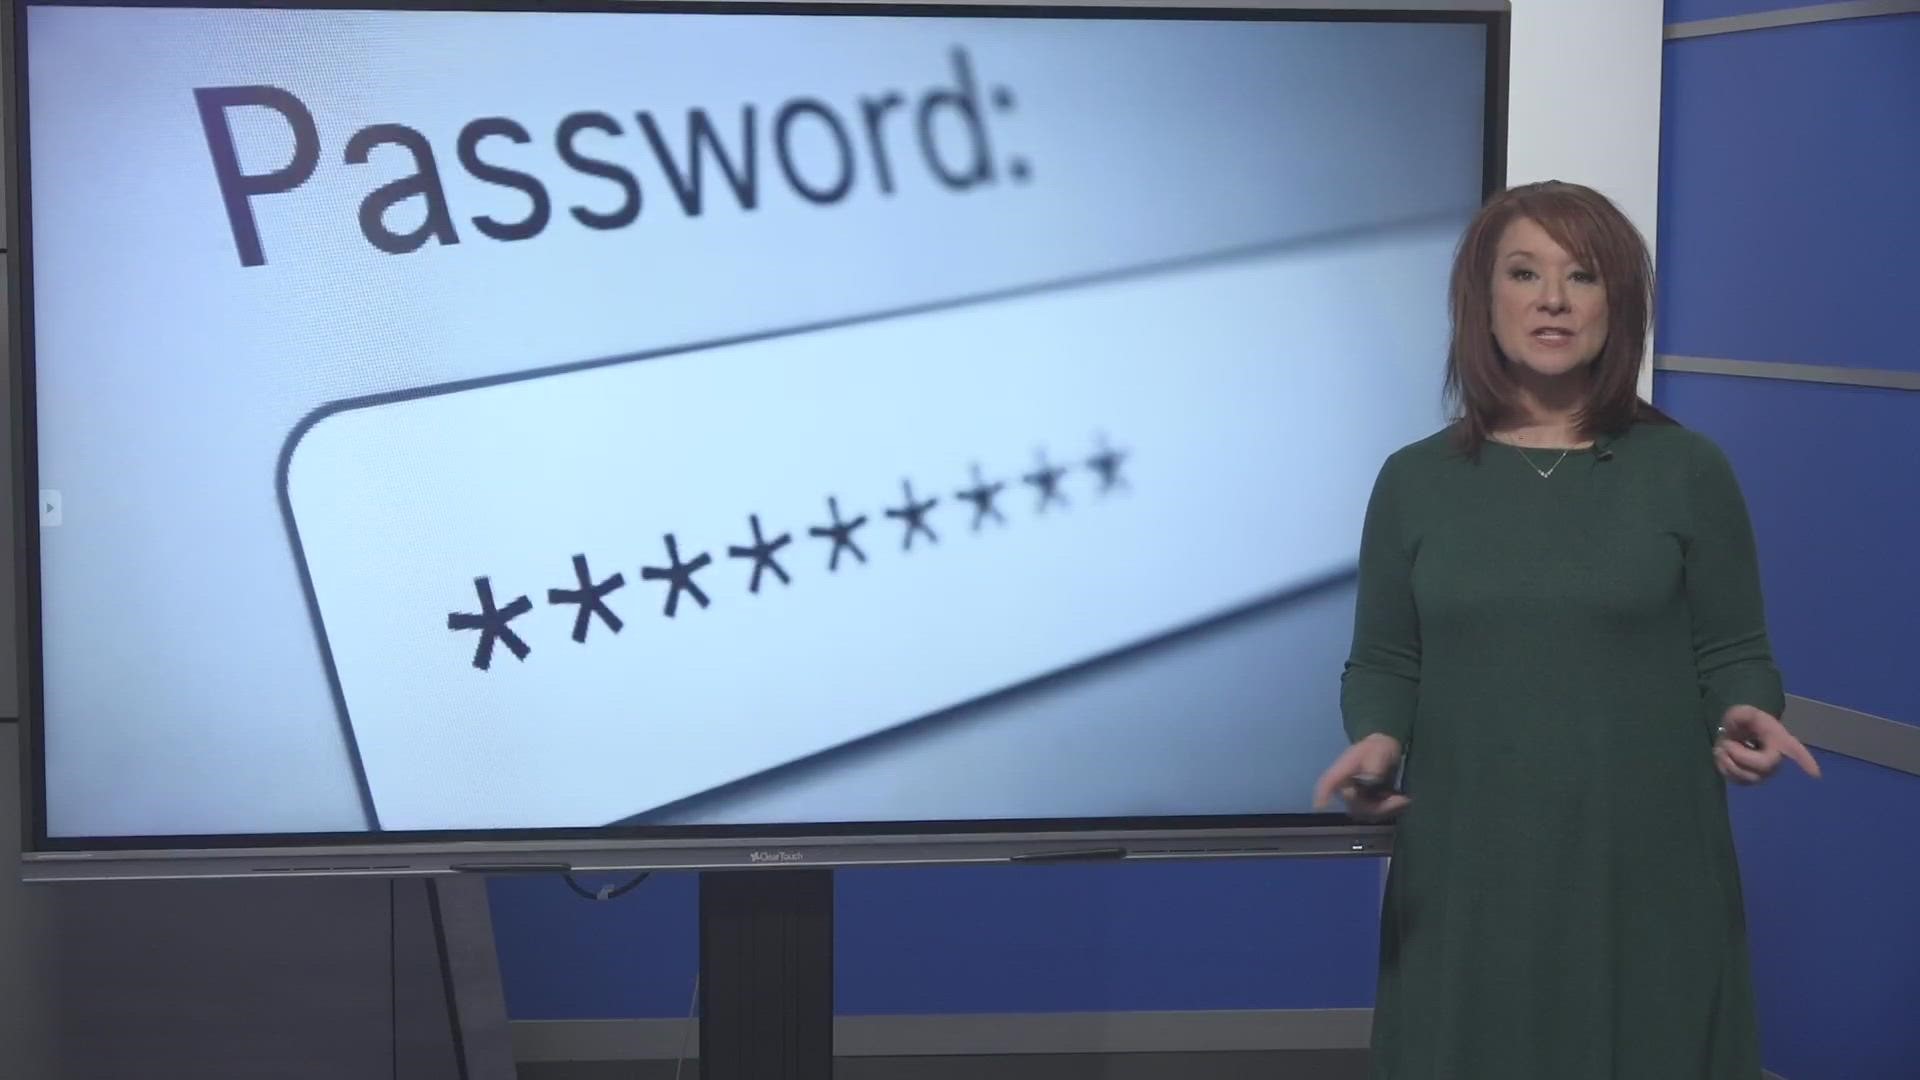 Are you capitalizing the first letter in your password? You’re doing it wrong! 2 Wants To Know shares life hacks for data privacy.